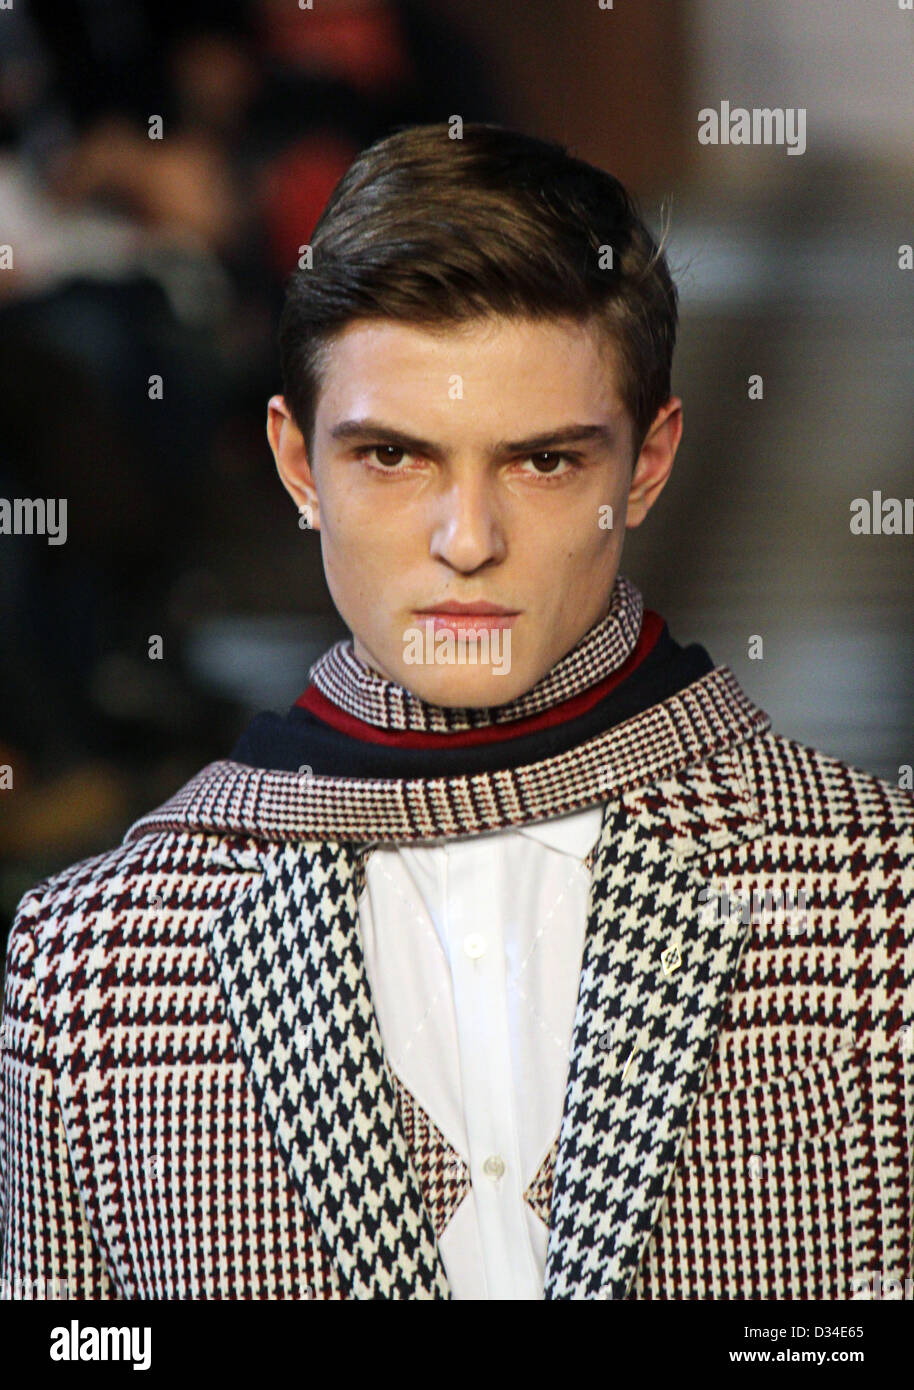 New York, USA. 8th February 2013. A model presents a creation by Tommy Hilfiger during the Fashion Week in New York City, USA, 08 February 2013. The Fall 2013 collections are presented from 07 to 14 February. Photo: Christina Horsten/dpa/Alamy Live News Stock Photo